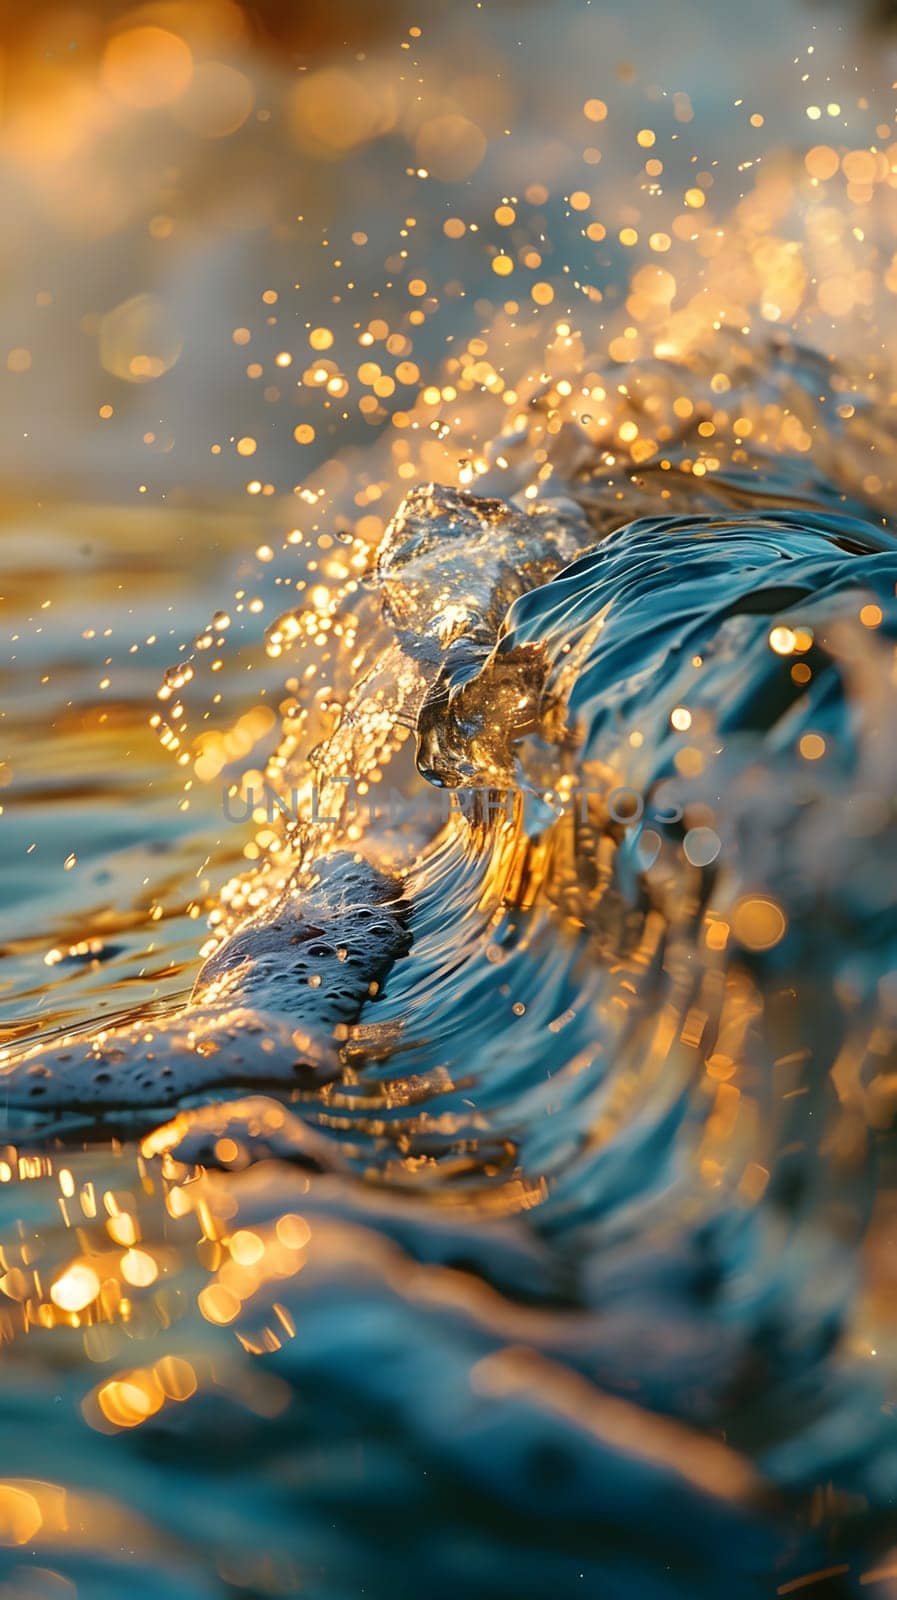 a close up of a wave in the ocean at sunset by Nadtochiy